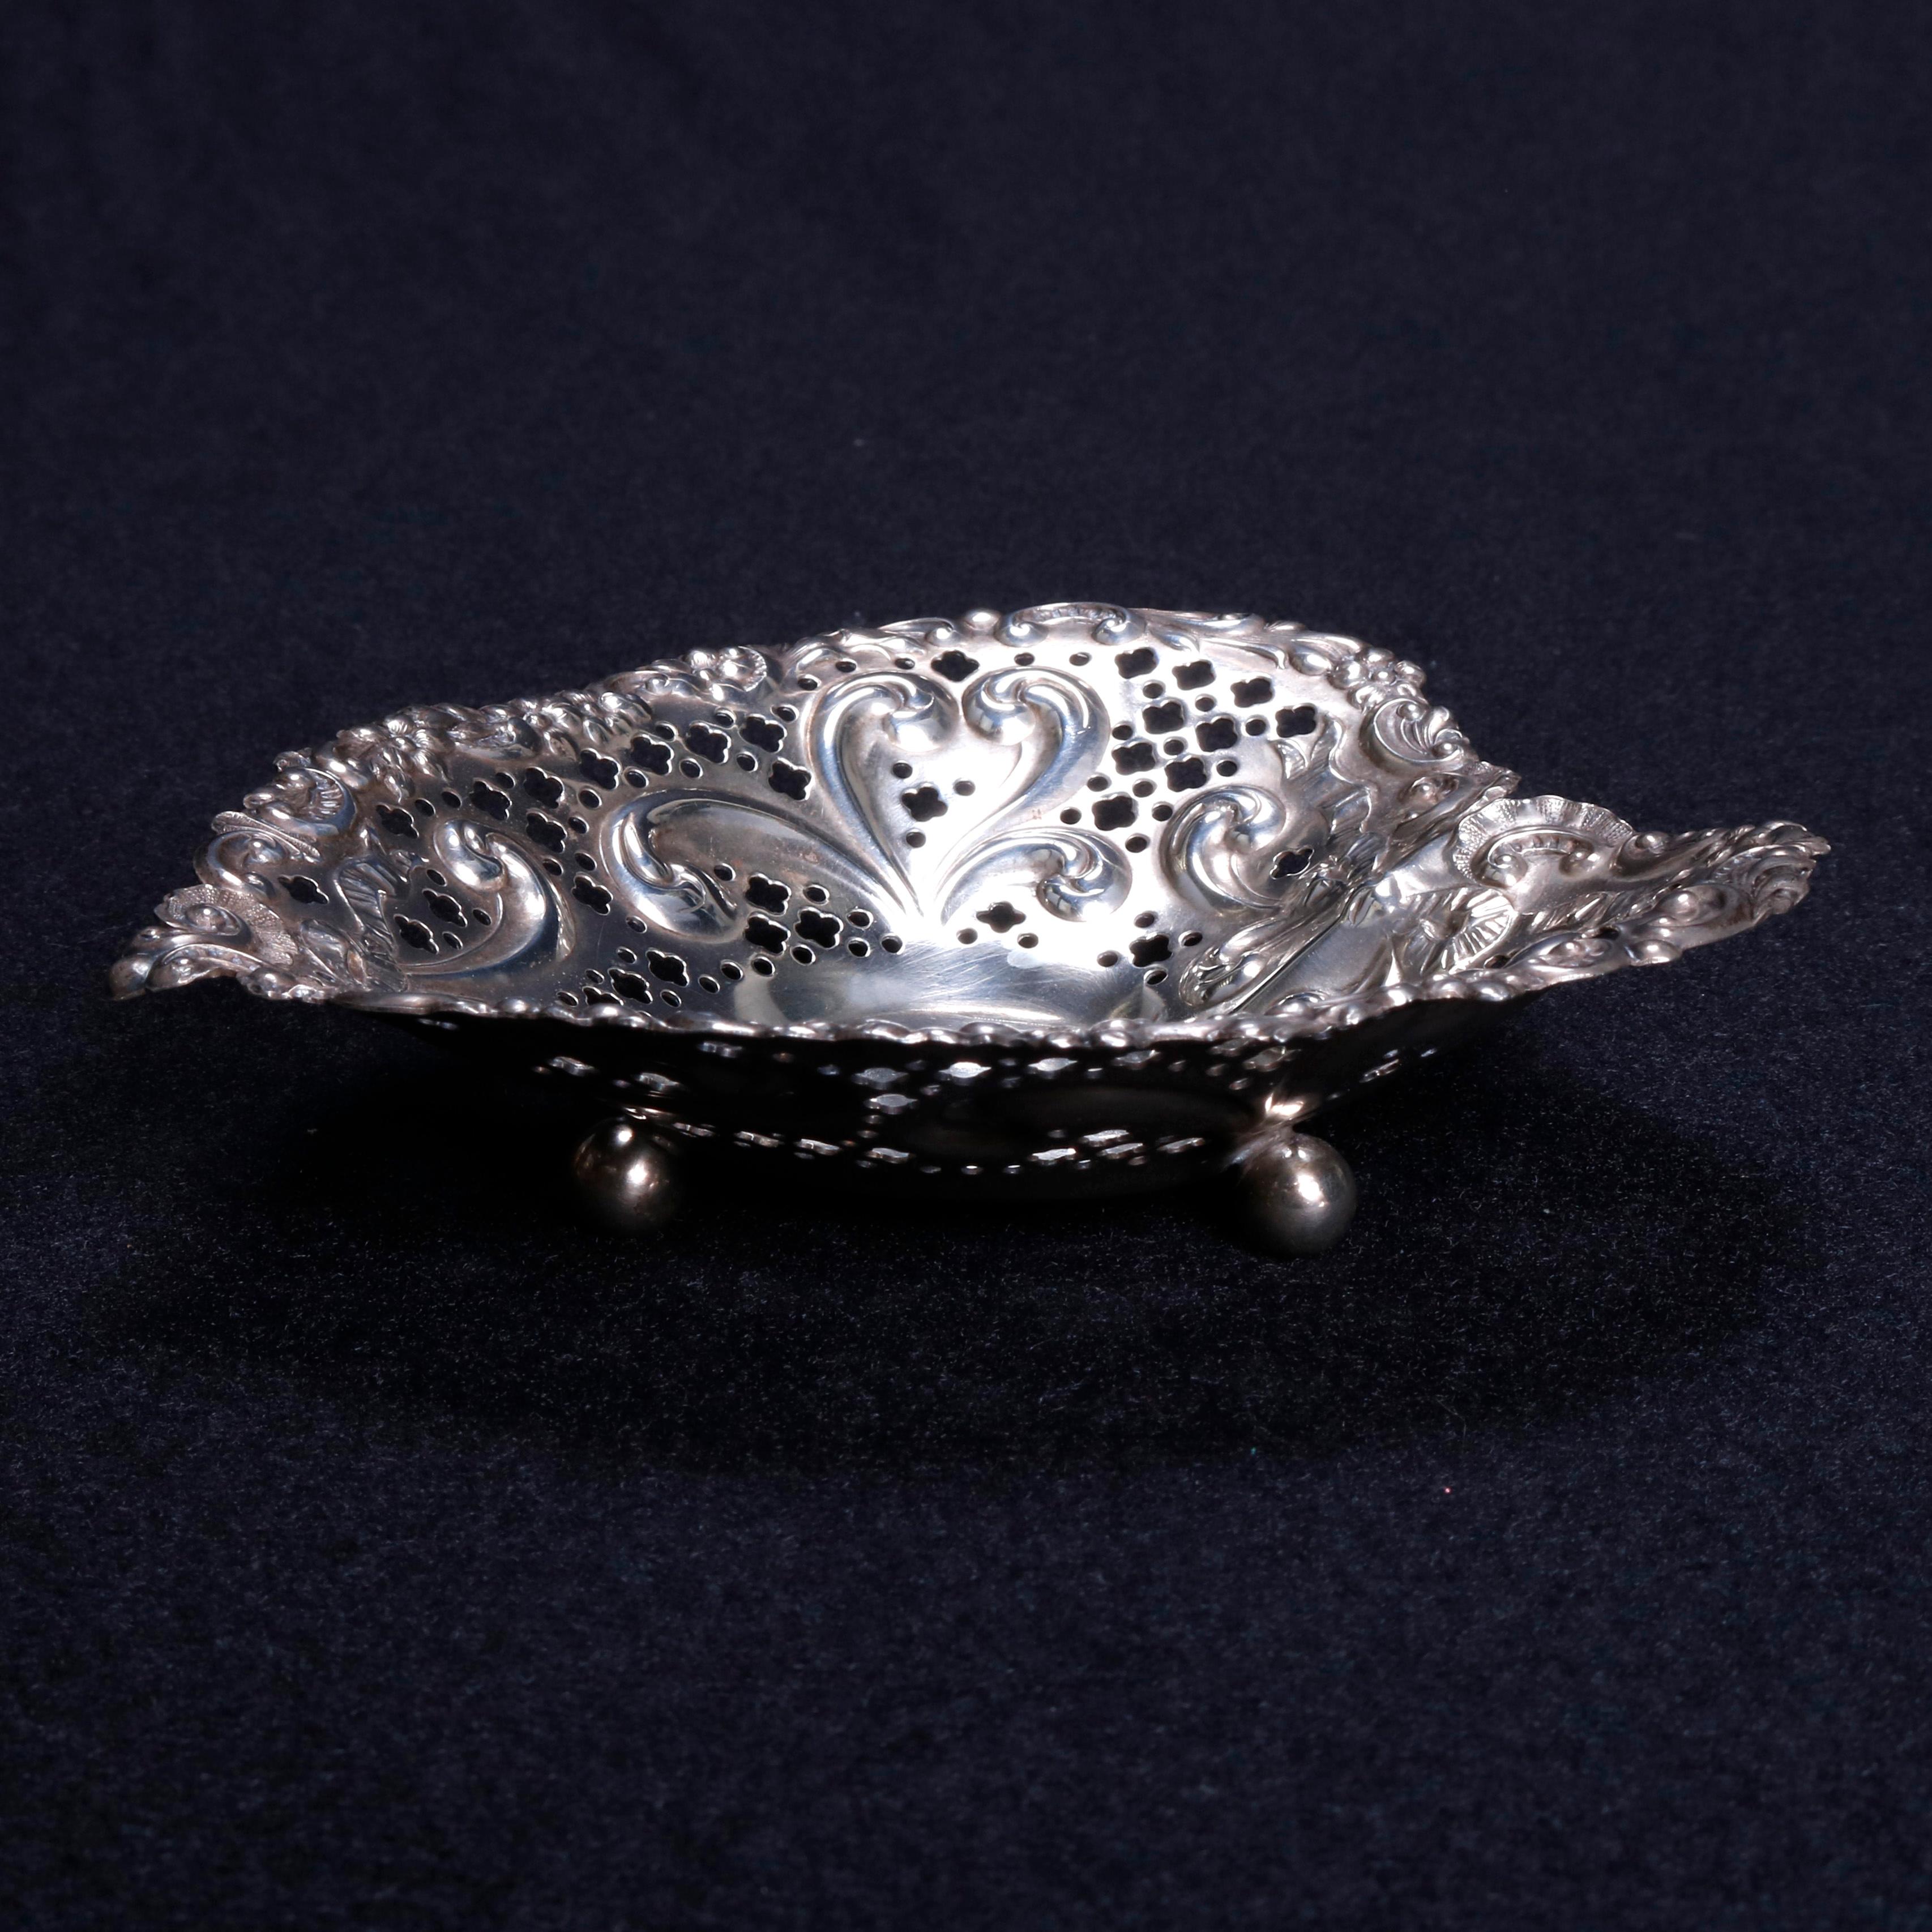 Antique Gorham sterling silver nut or candy dishes feature reticulated heart shaped bowls with scroll and foliate designing, seated on ball feet, en verso maker mark as photographed, circa 1890

Measures: 1.25